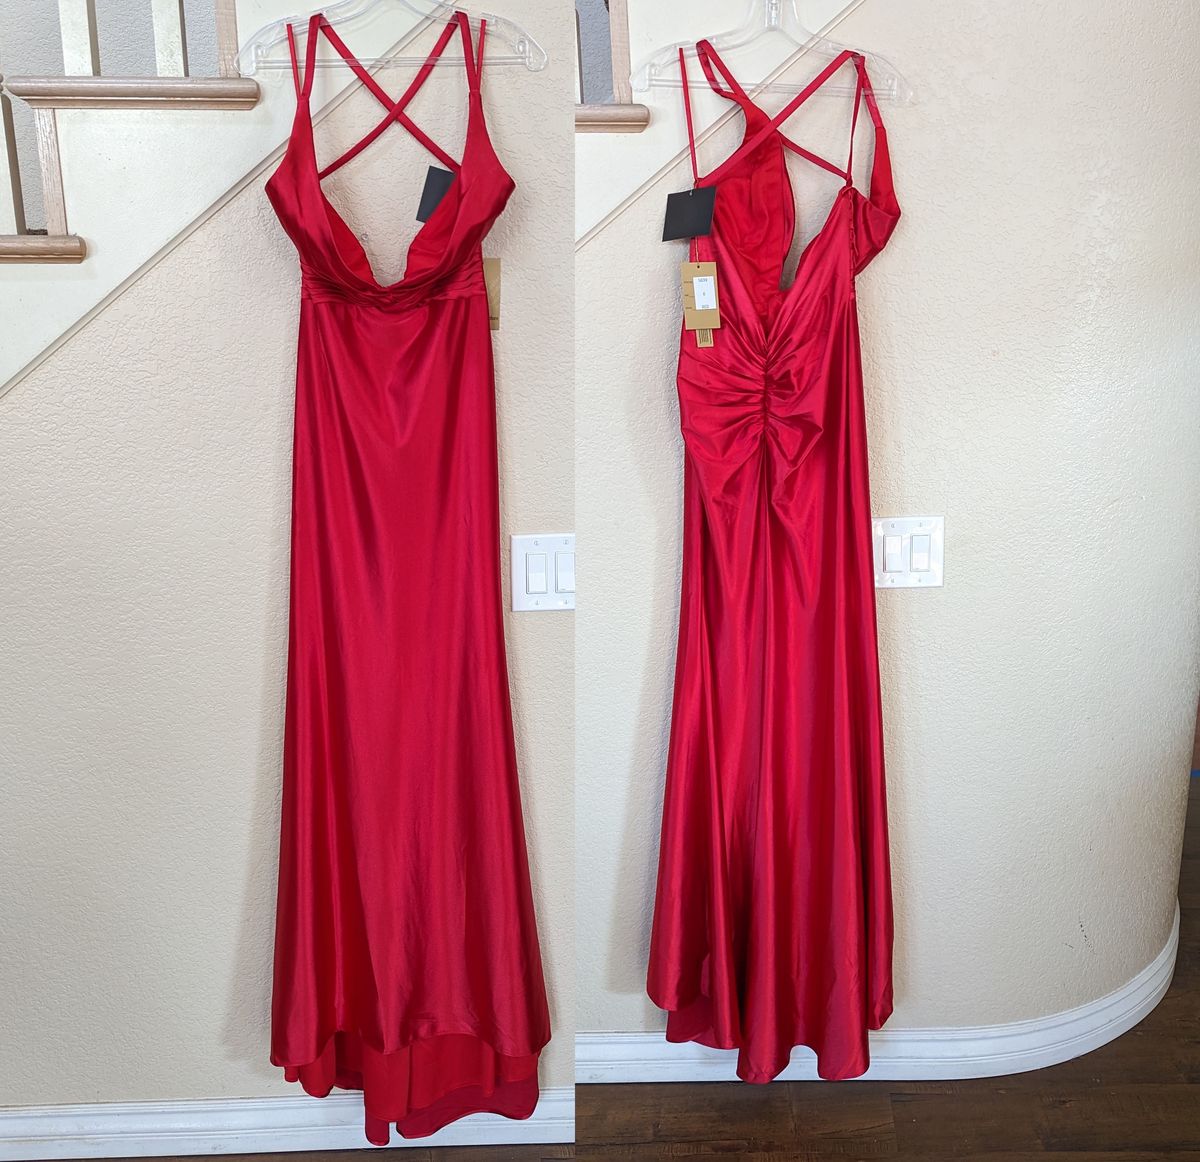 Amelia Couture Size 8 Prom Plunge Red Mermaid Dress on Queenly